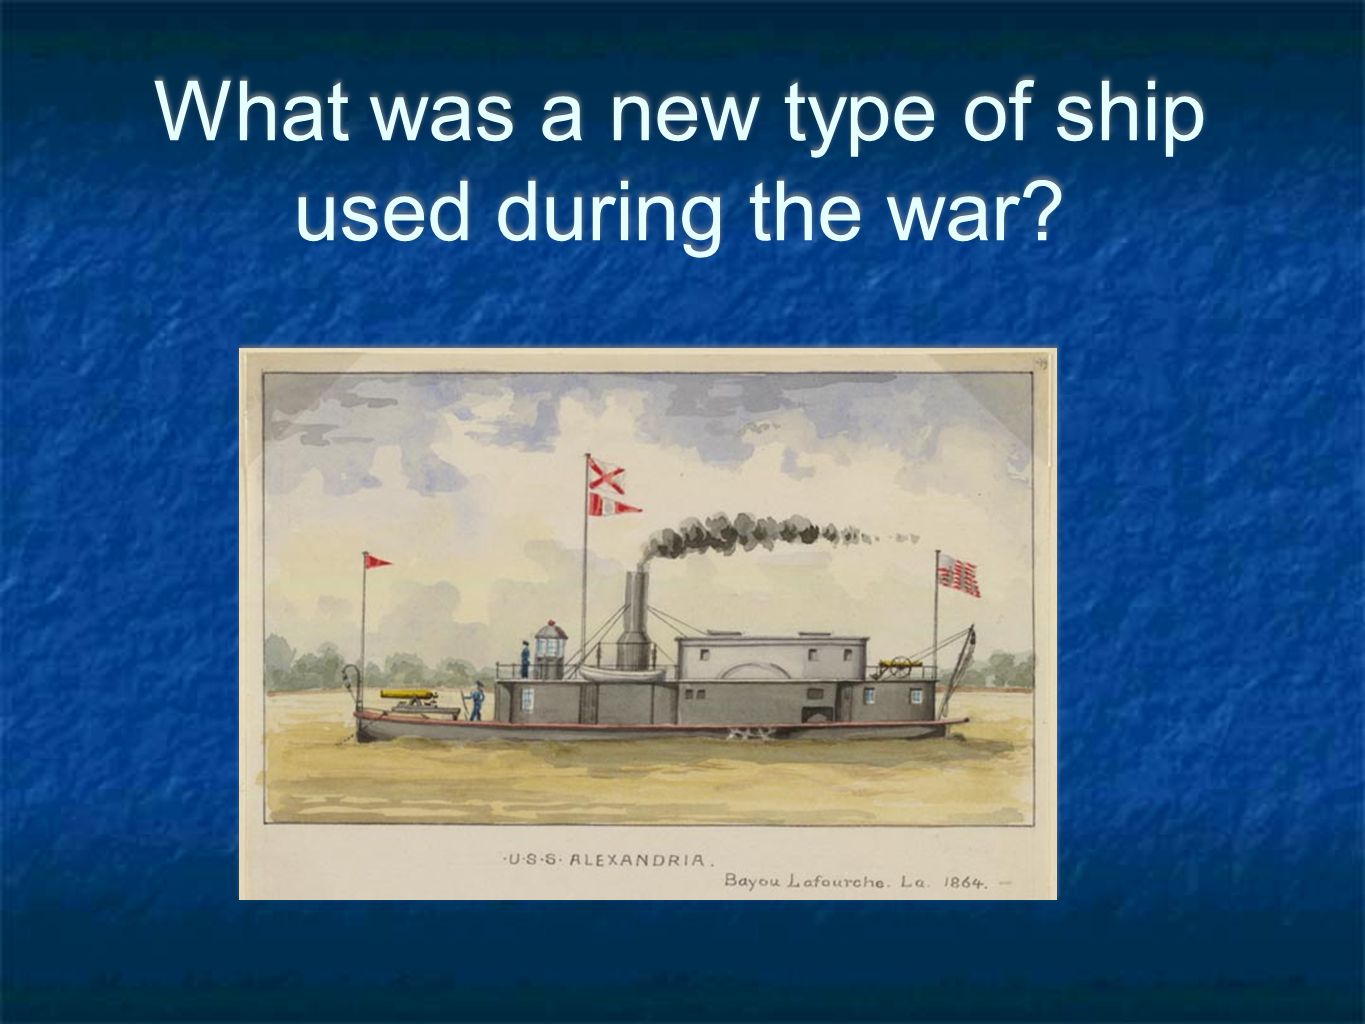 What was a new type of ship used during the war